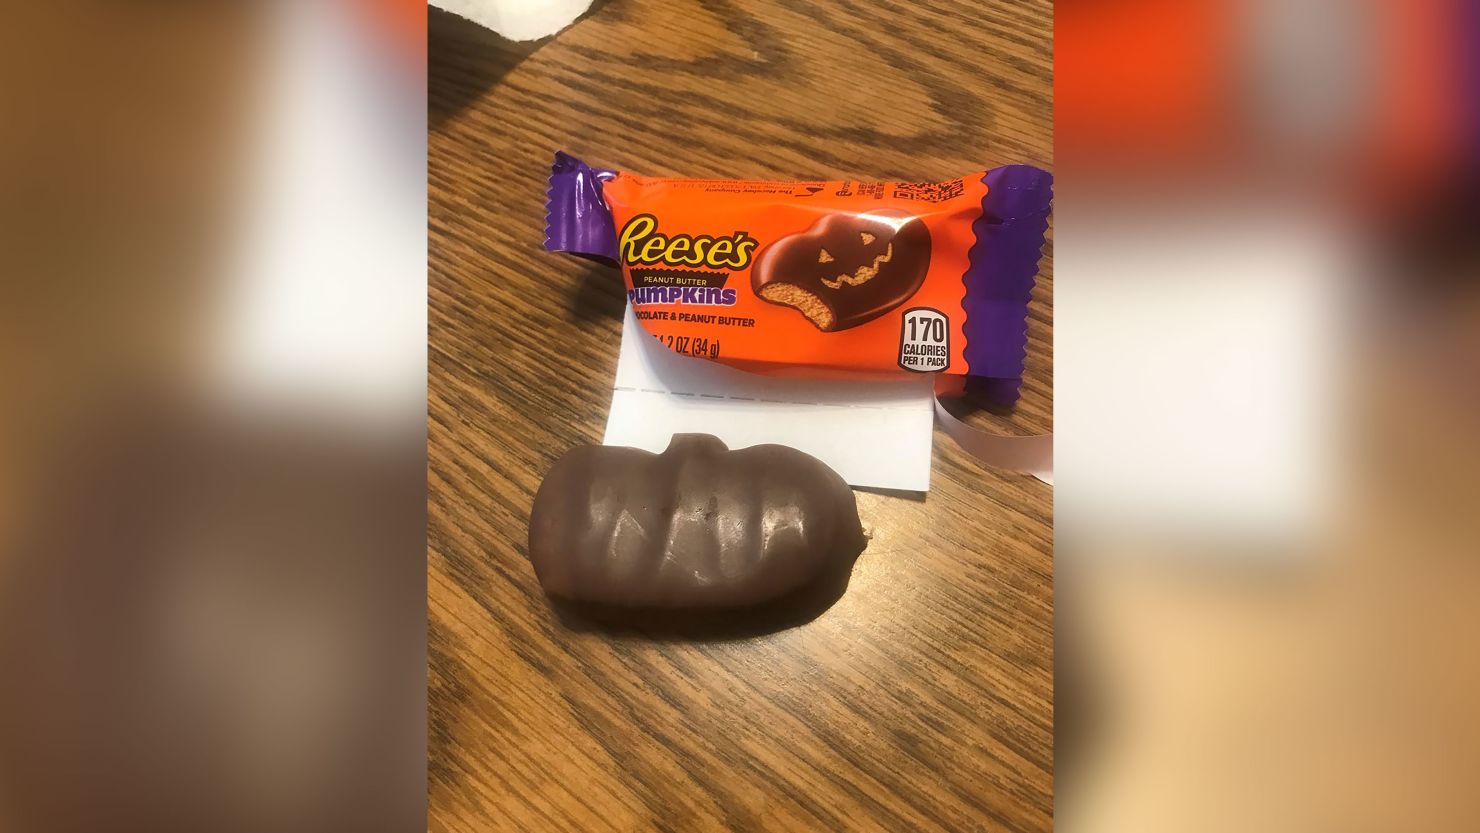 Hershey is sued for selling Reese’s Peanut Butter cups without ‘cute